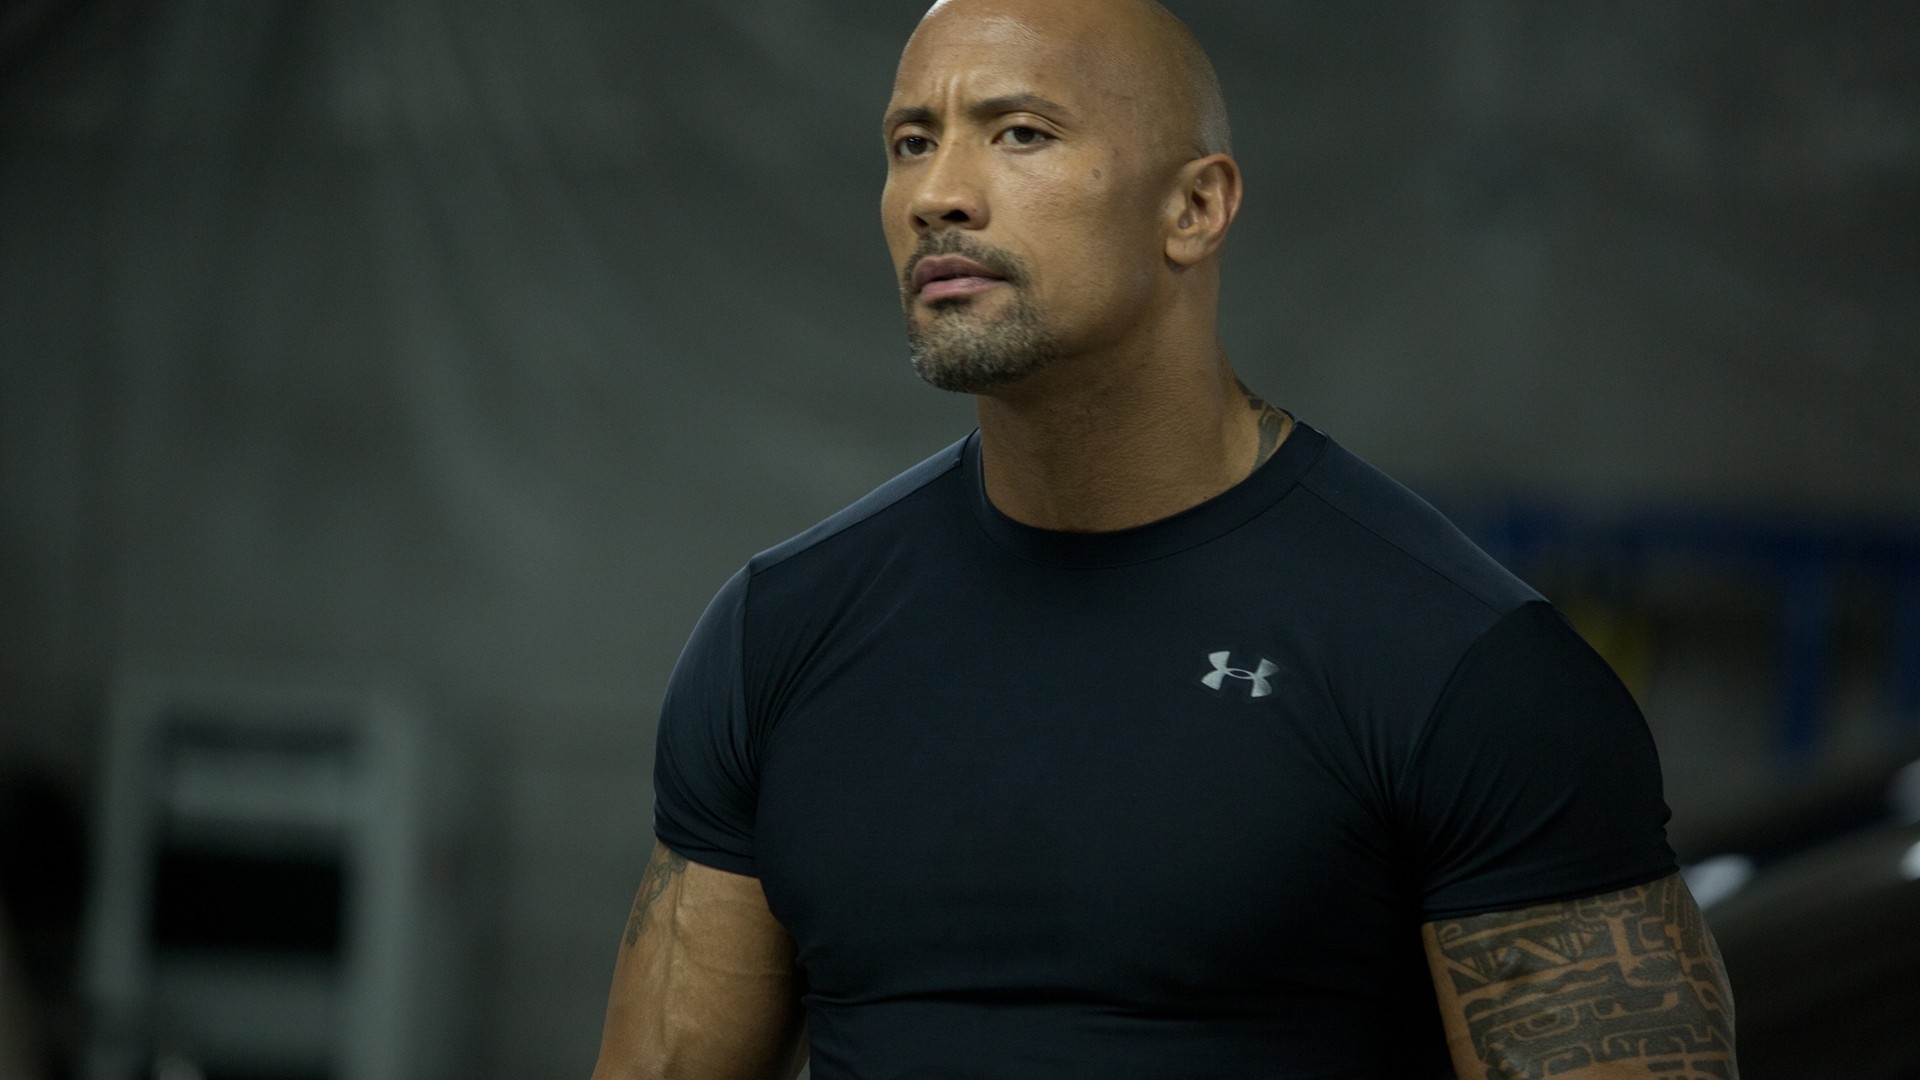 Dwayne Johnson Fast and Furious 6 for 1920 x 1080 HDTV 1080p resolution